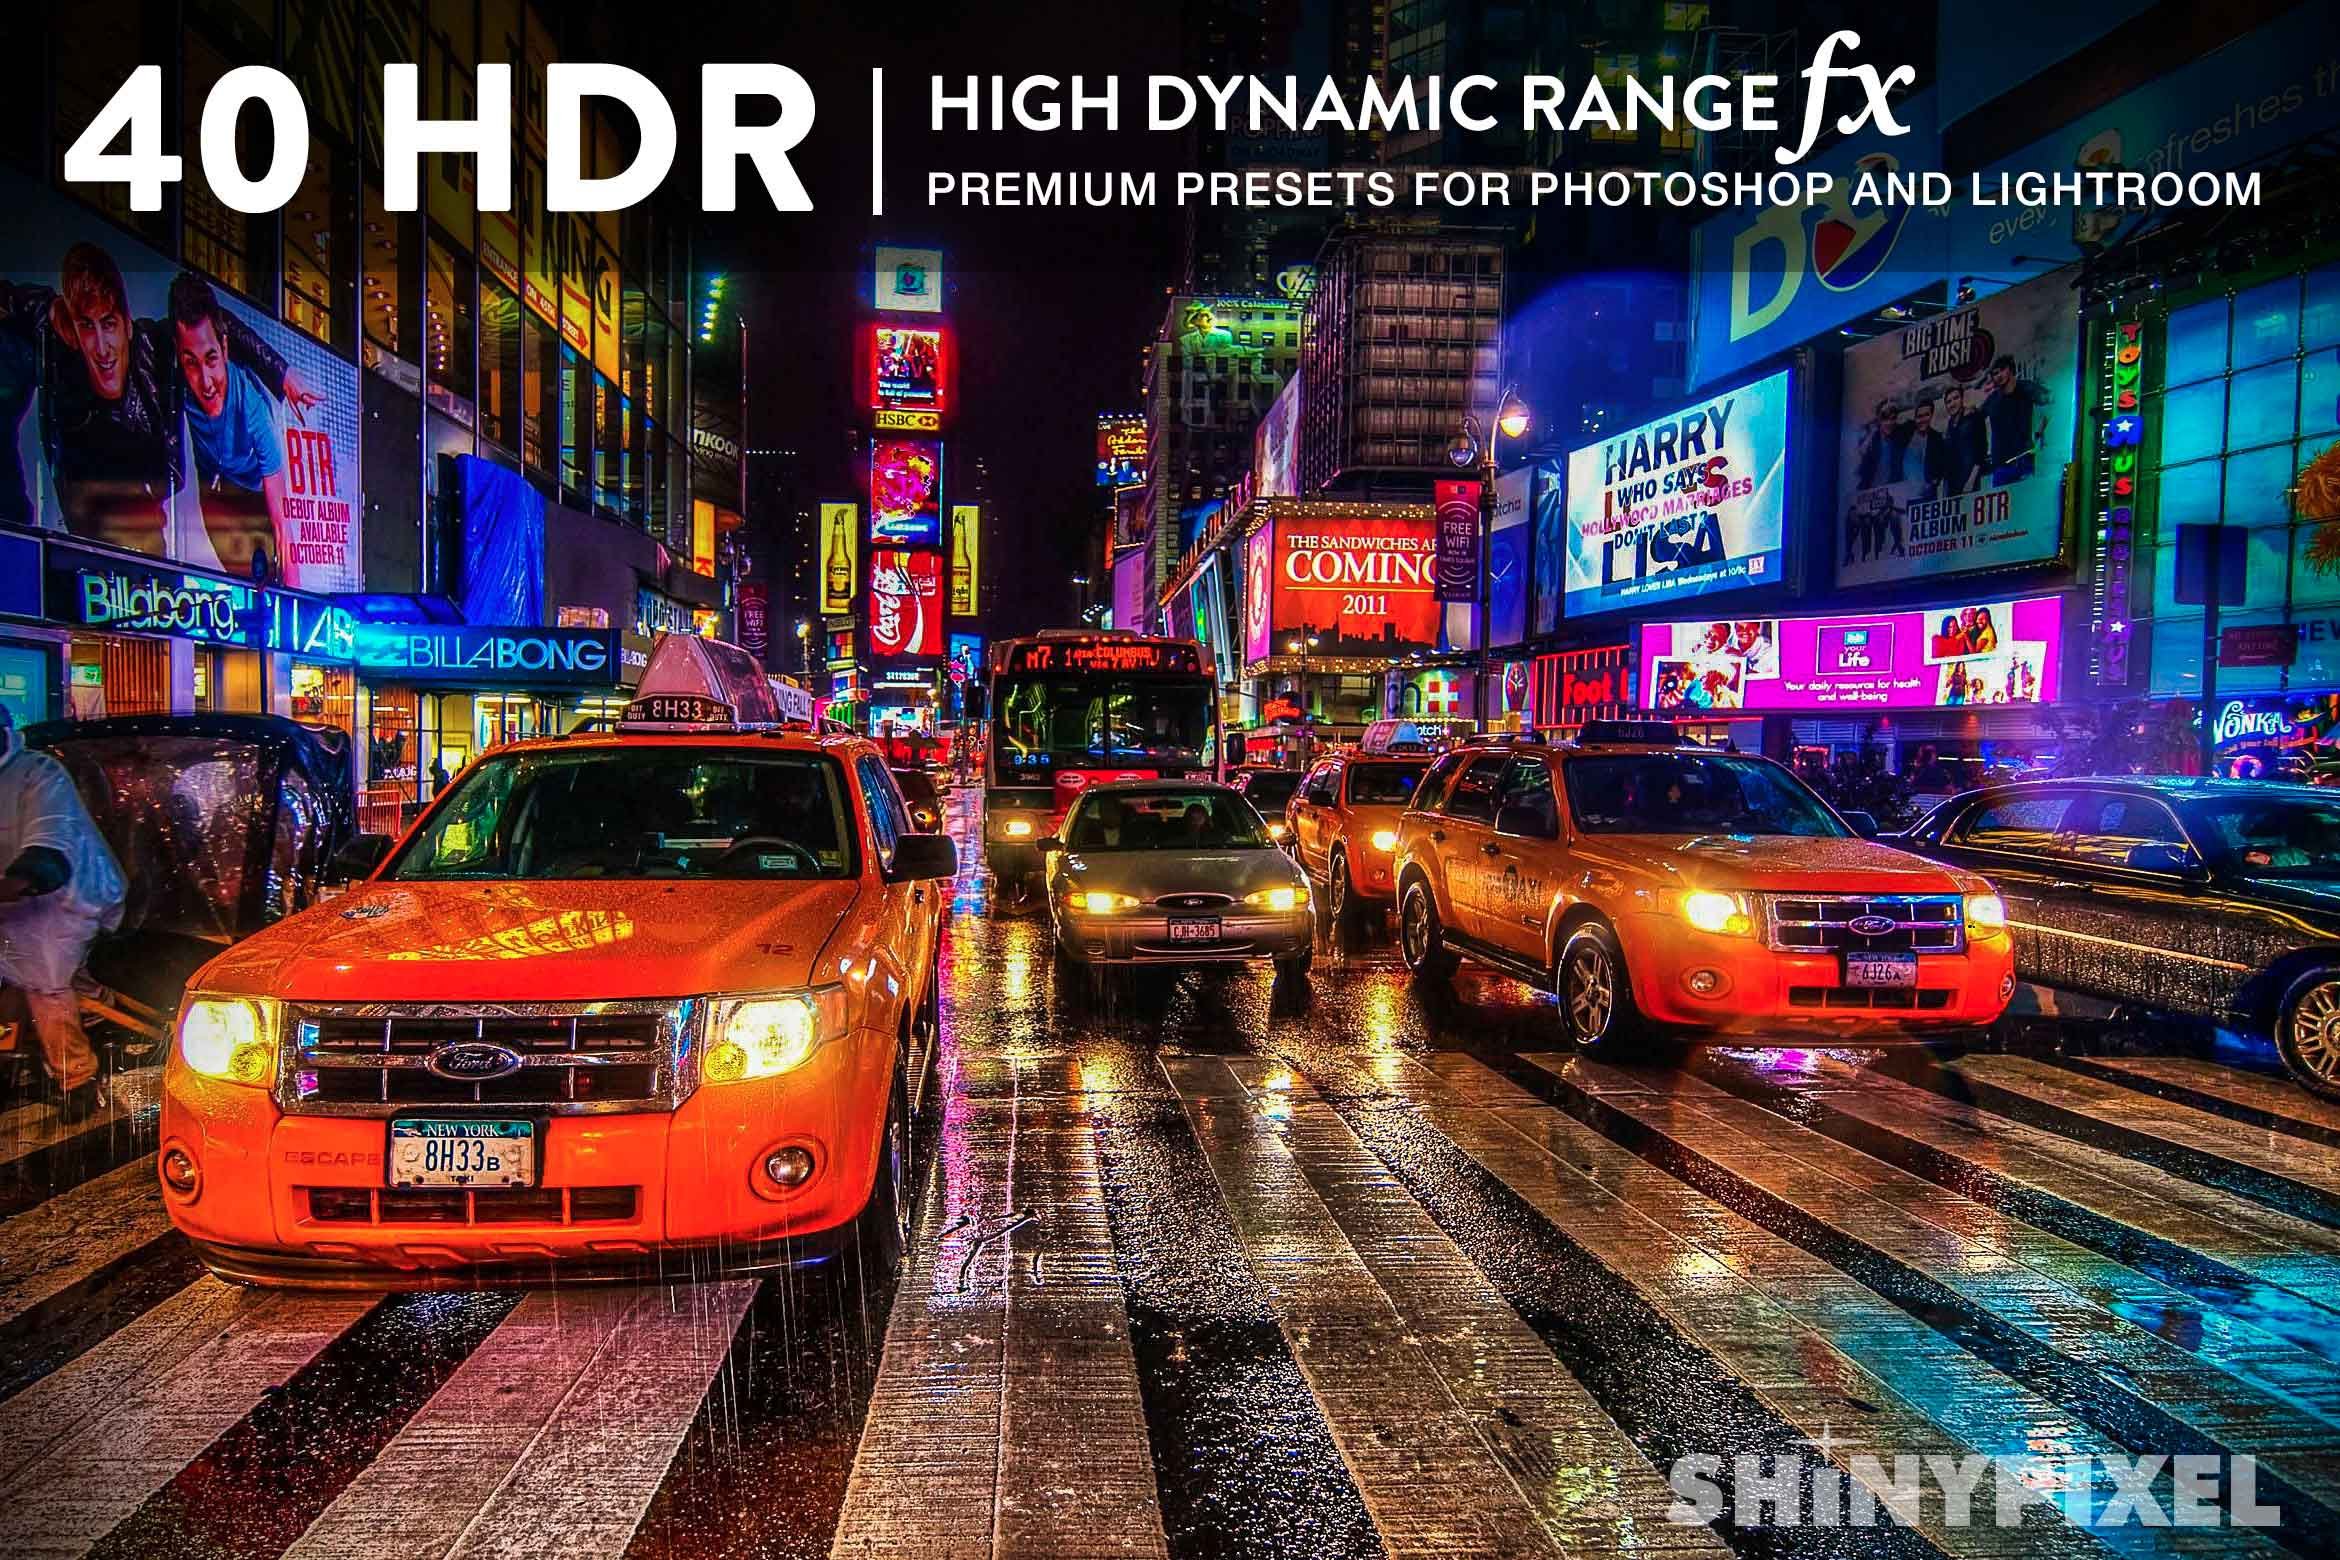 40 HDR Premium Presets for Ps and Lrcover image.